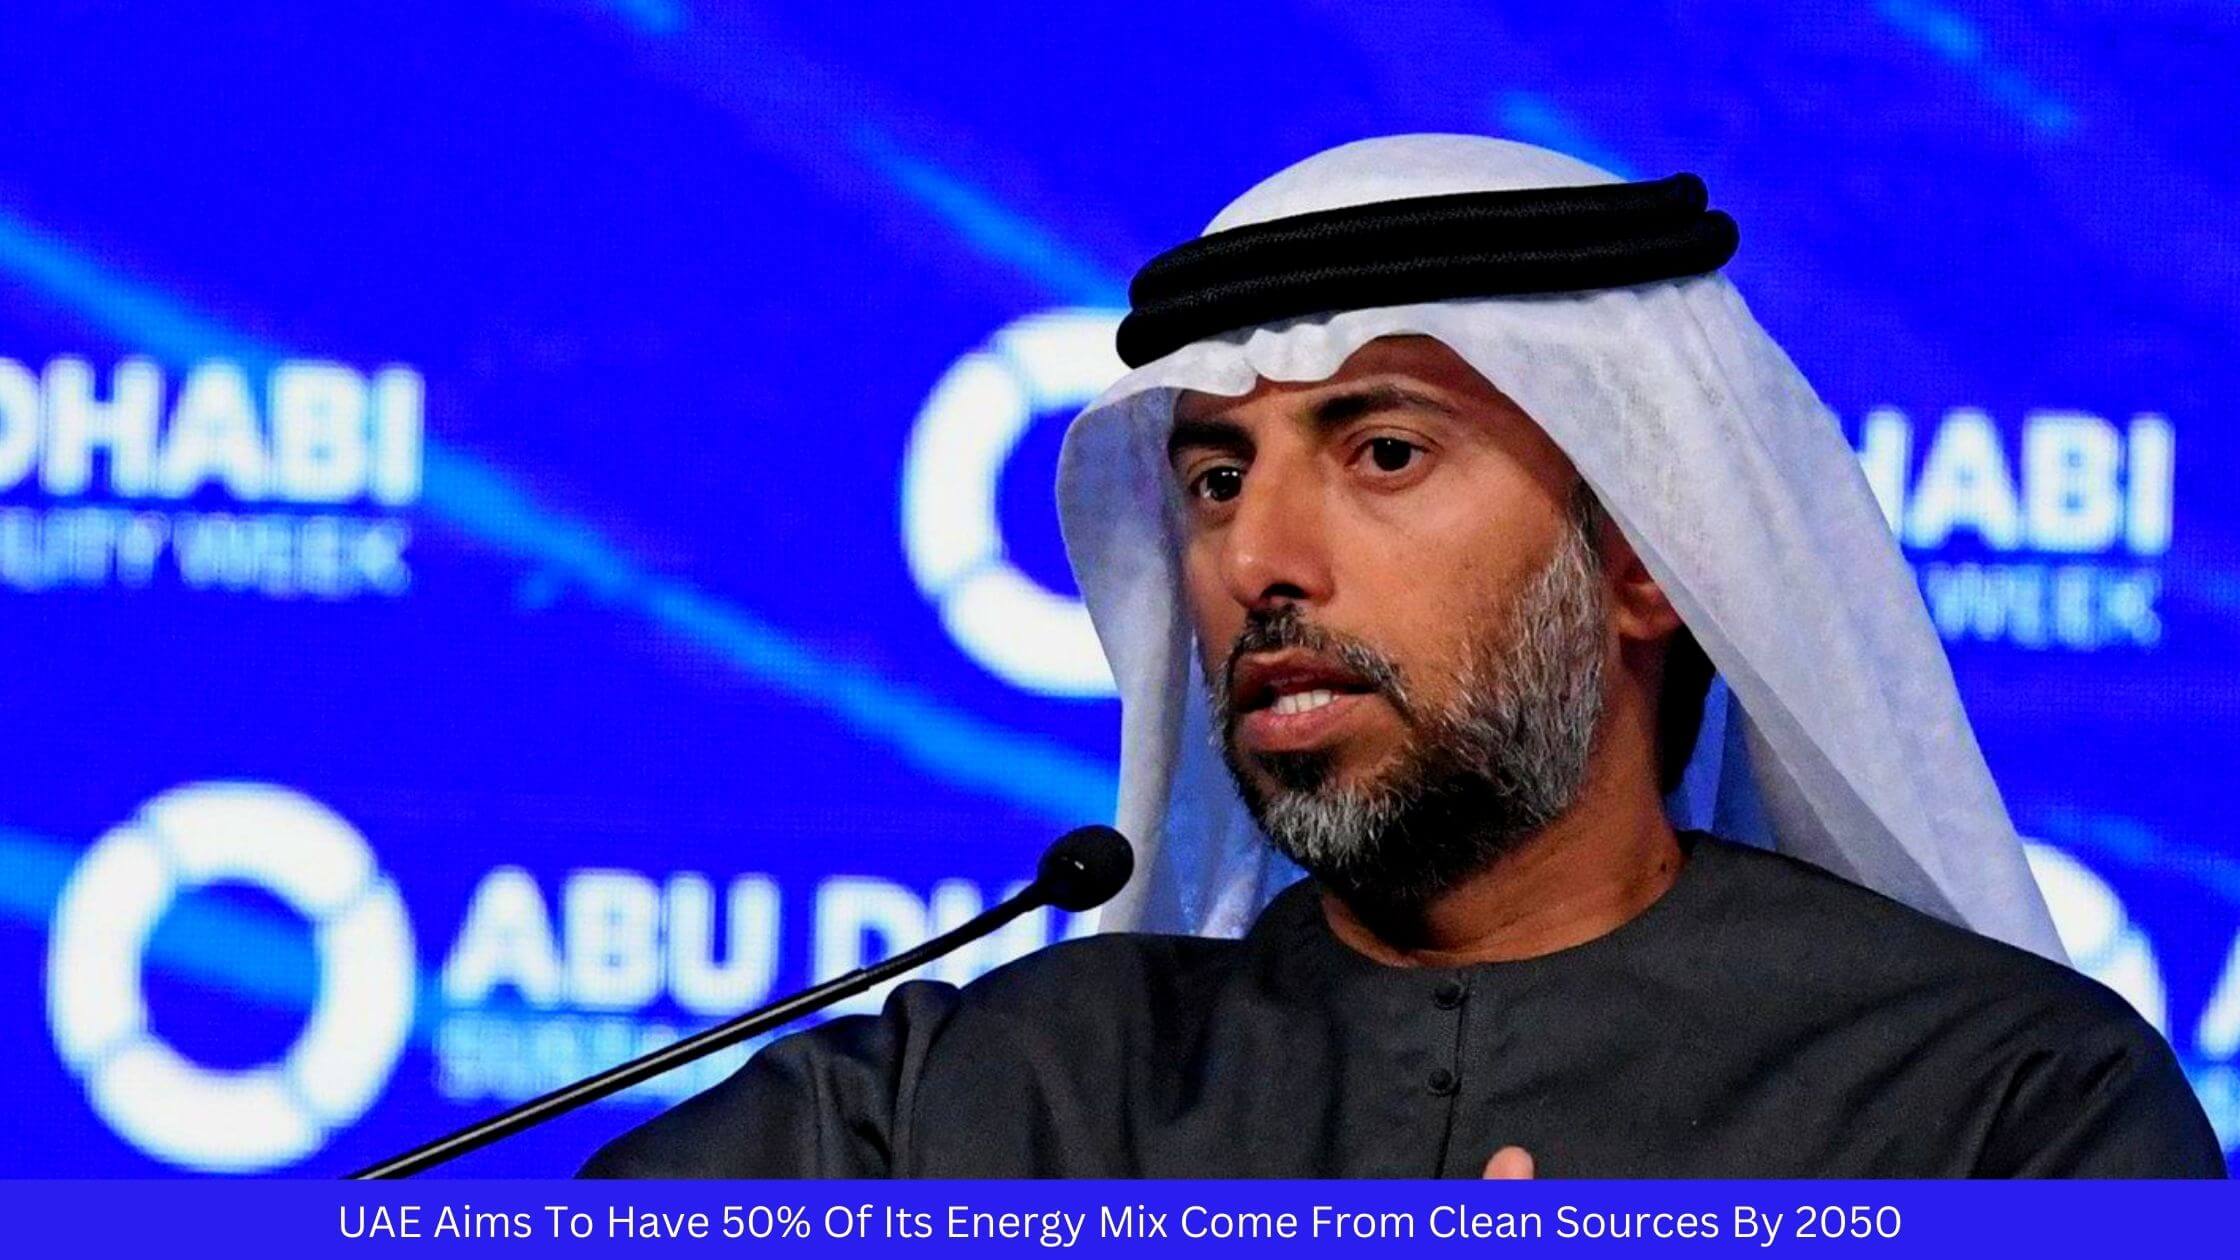 UAE Aims To Have 50% Of Its Energy Mix Come From Clean Sources By 2050